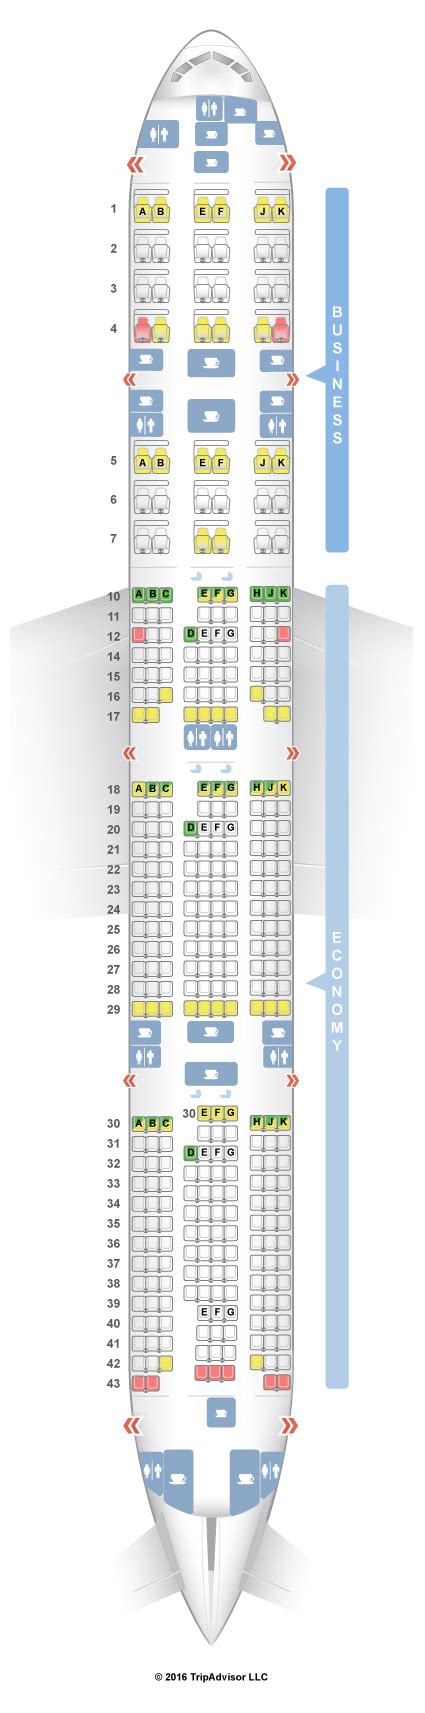 Seat map for qatar airways. At 190cm body size is a nightmare chair! restricted legroom and limited under seat storage space due to the presence of an entertainment equipment box. Find the best seat wiht our Qatar Airways Boeing 787-8 (788) seating chart. Use this seat map to get the most comfortable seats, legroom and recline before booking. 